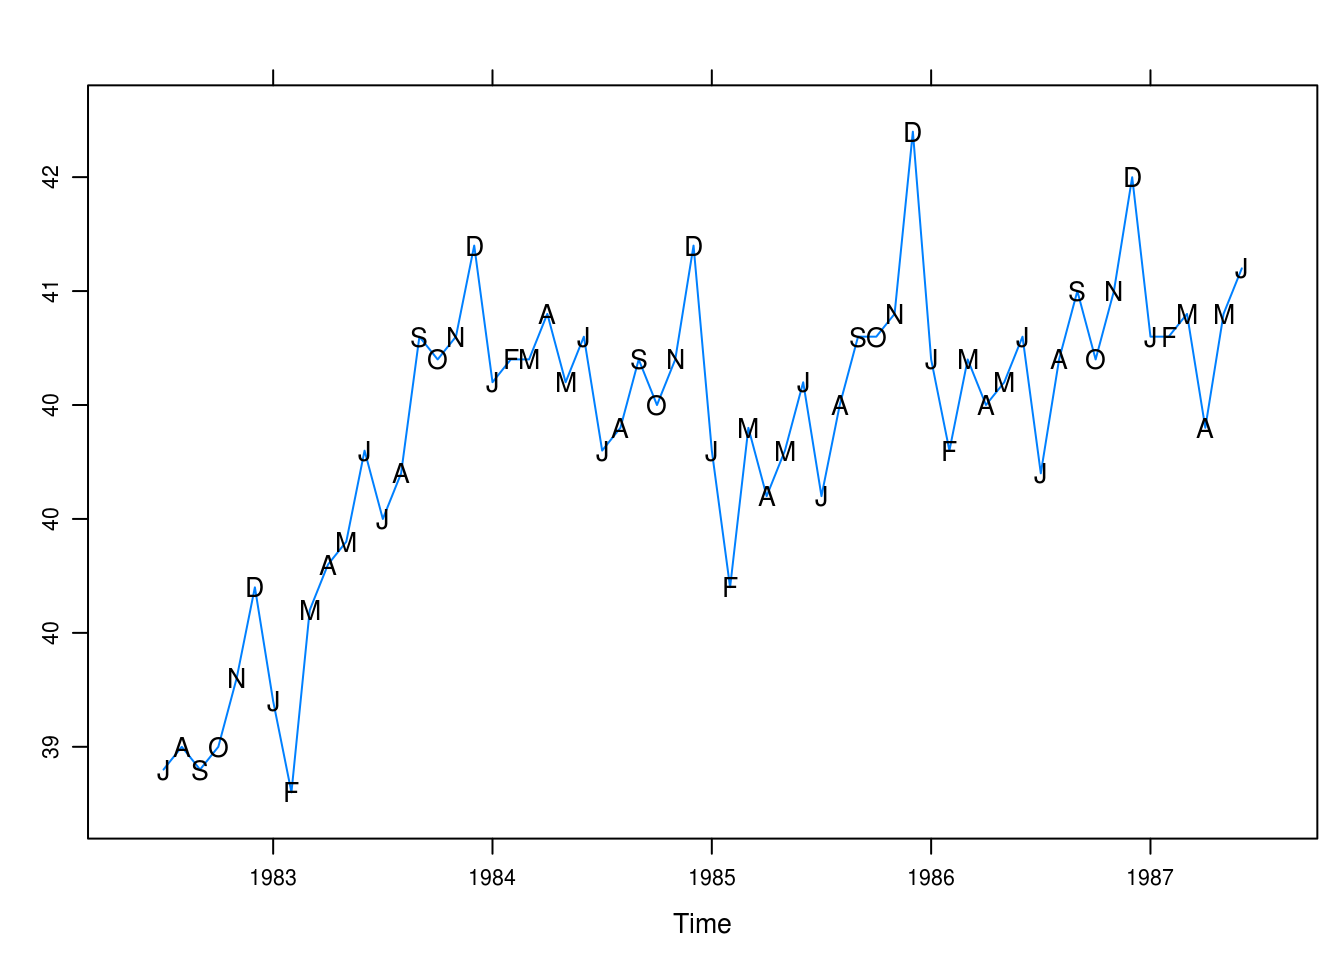 Monthly values of average hours worked per week with superposed initials of months.